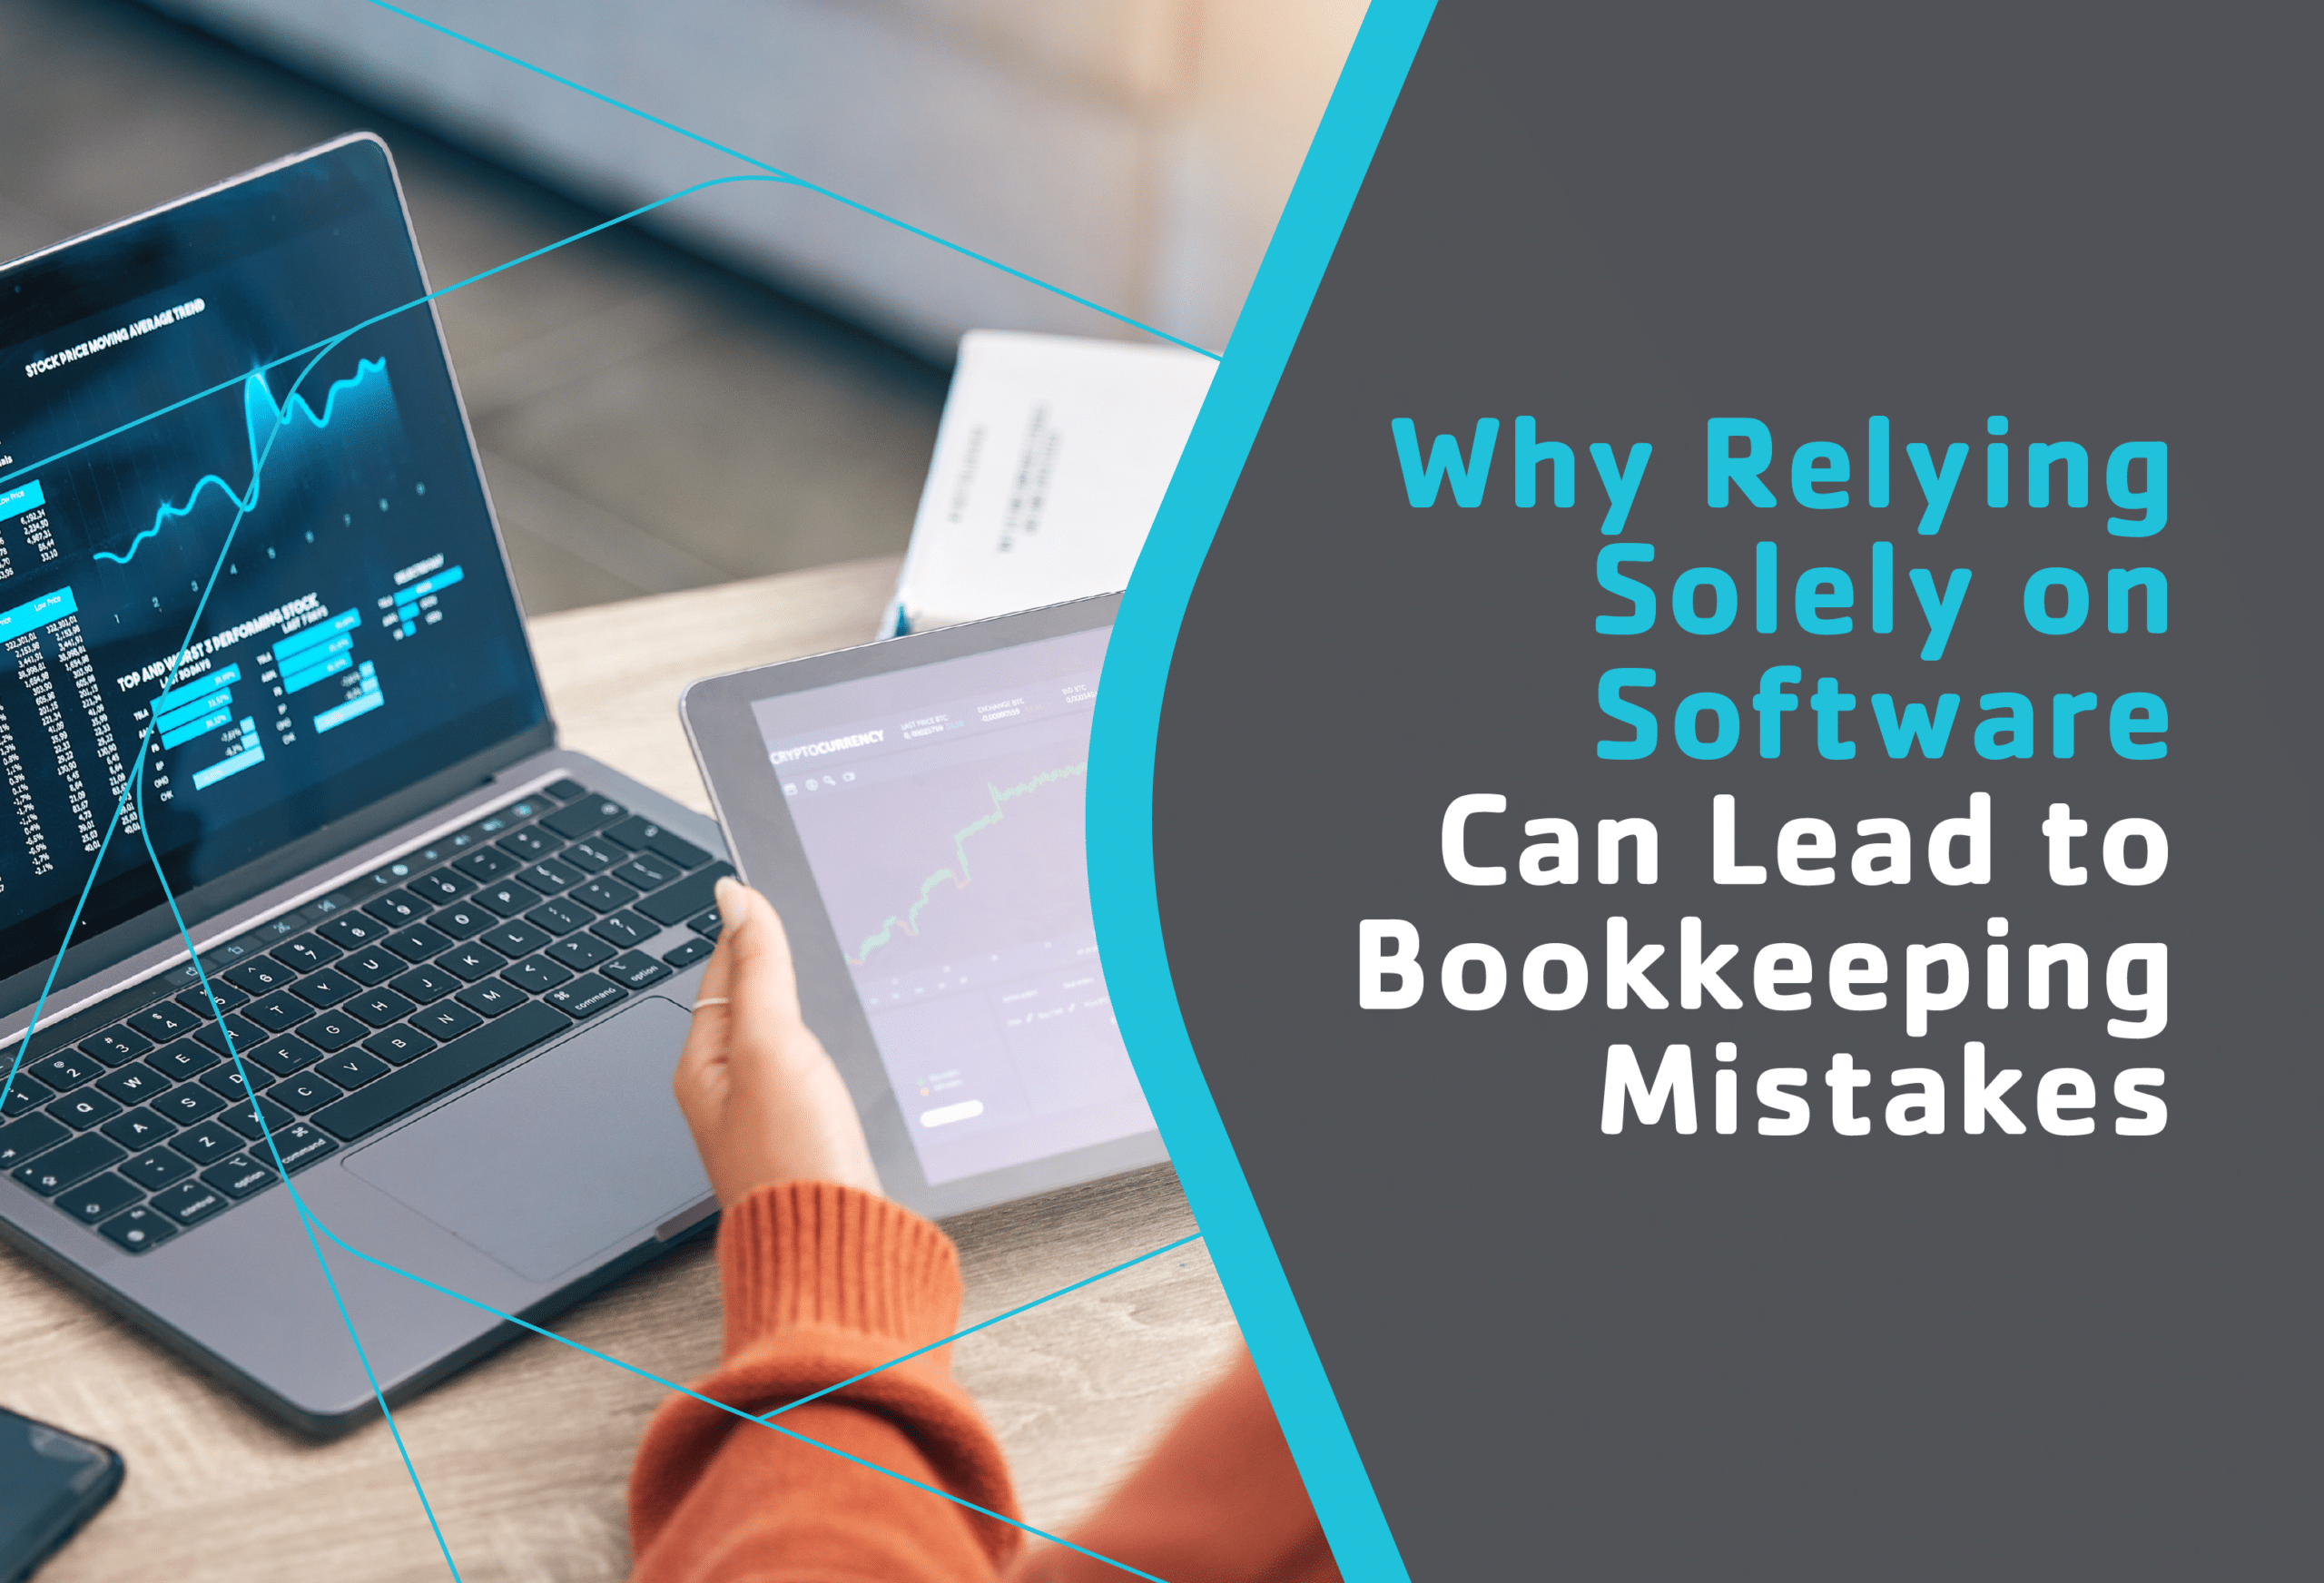 Why Relying Solely on Software Can Lead to Bookkeeping Mistakes